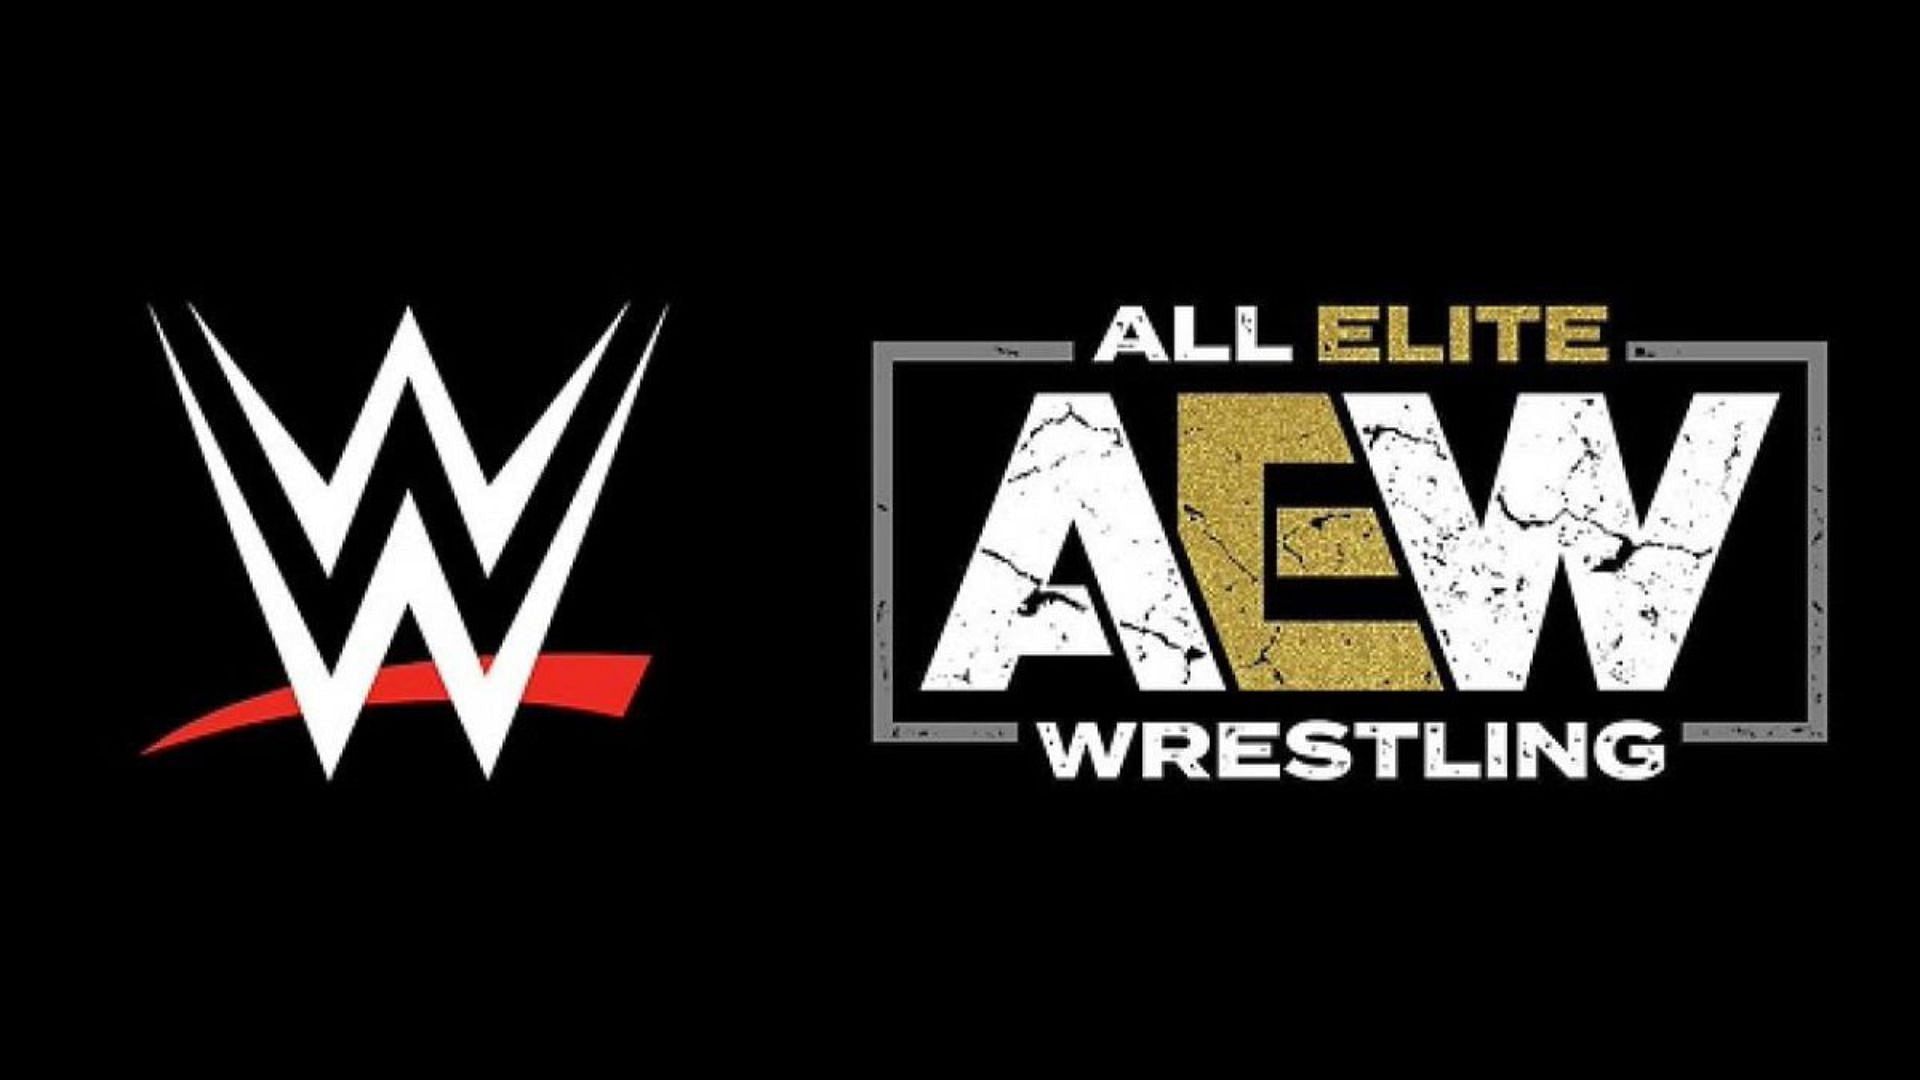 Find out which AEW star is released from the promotion?